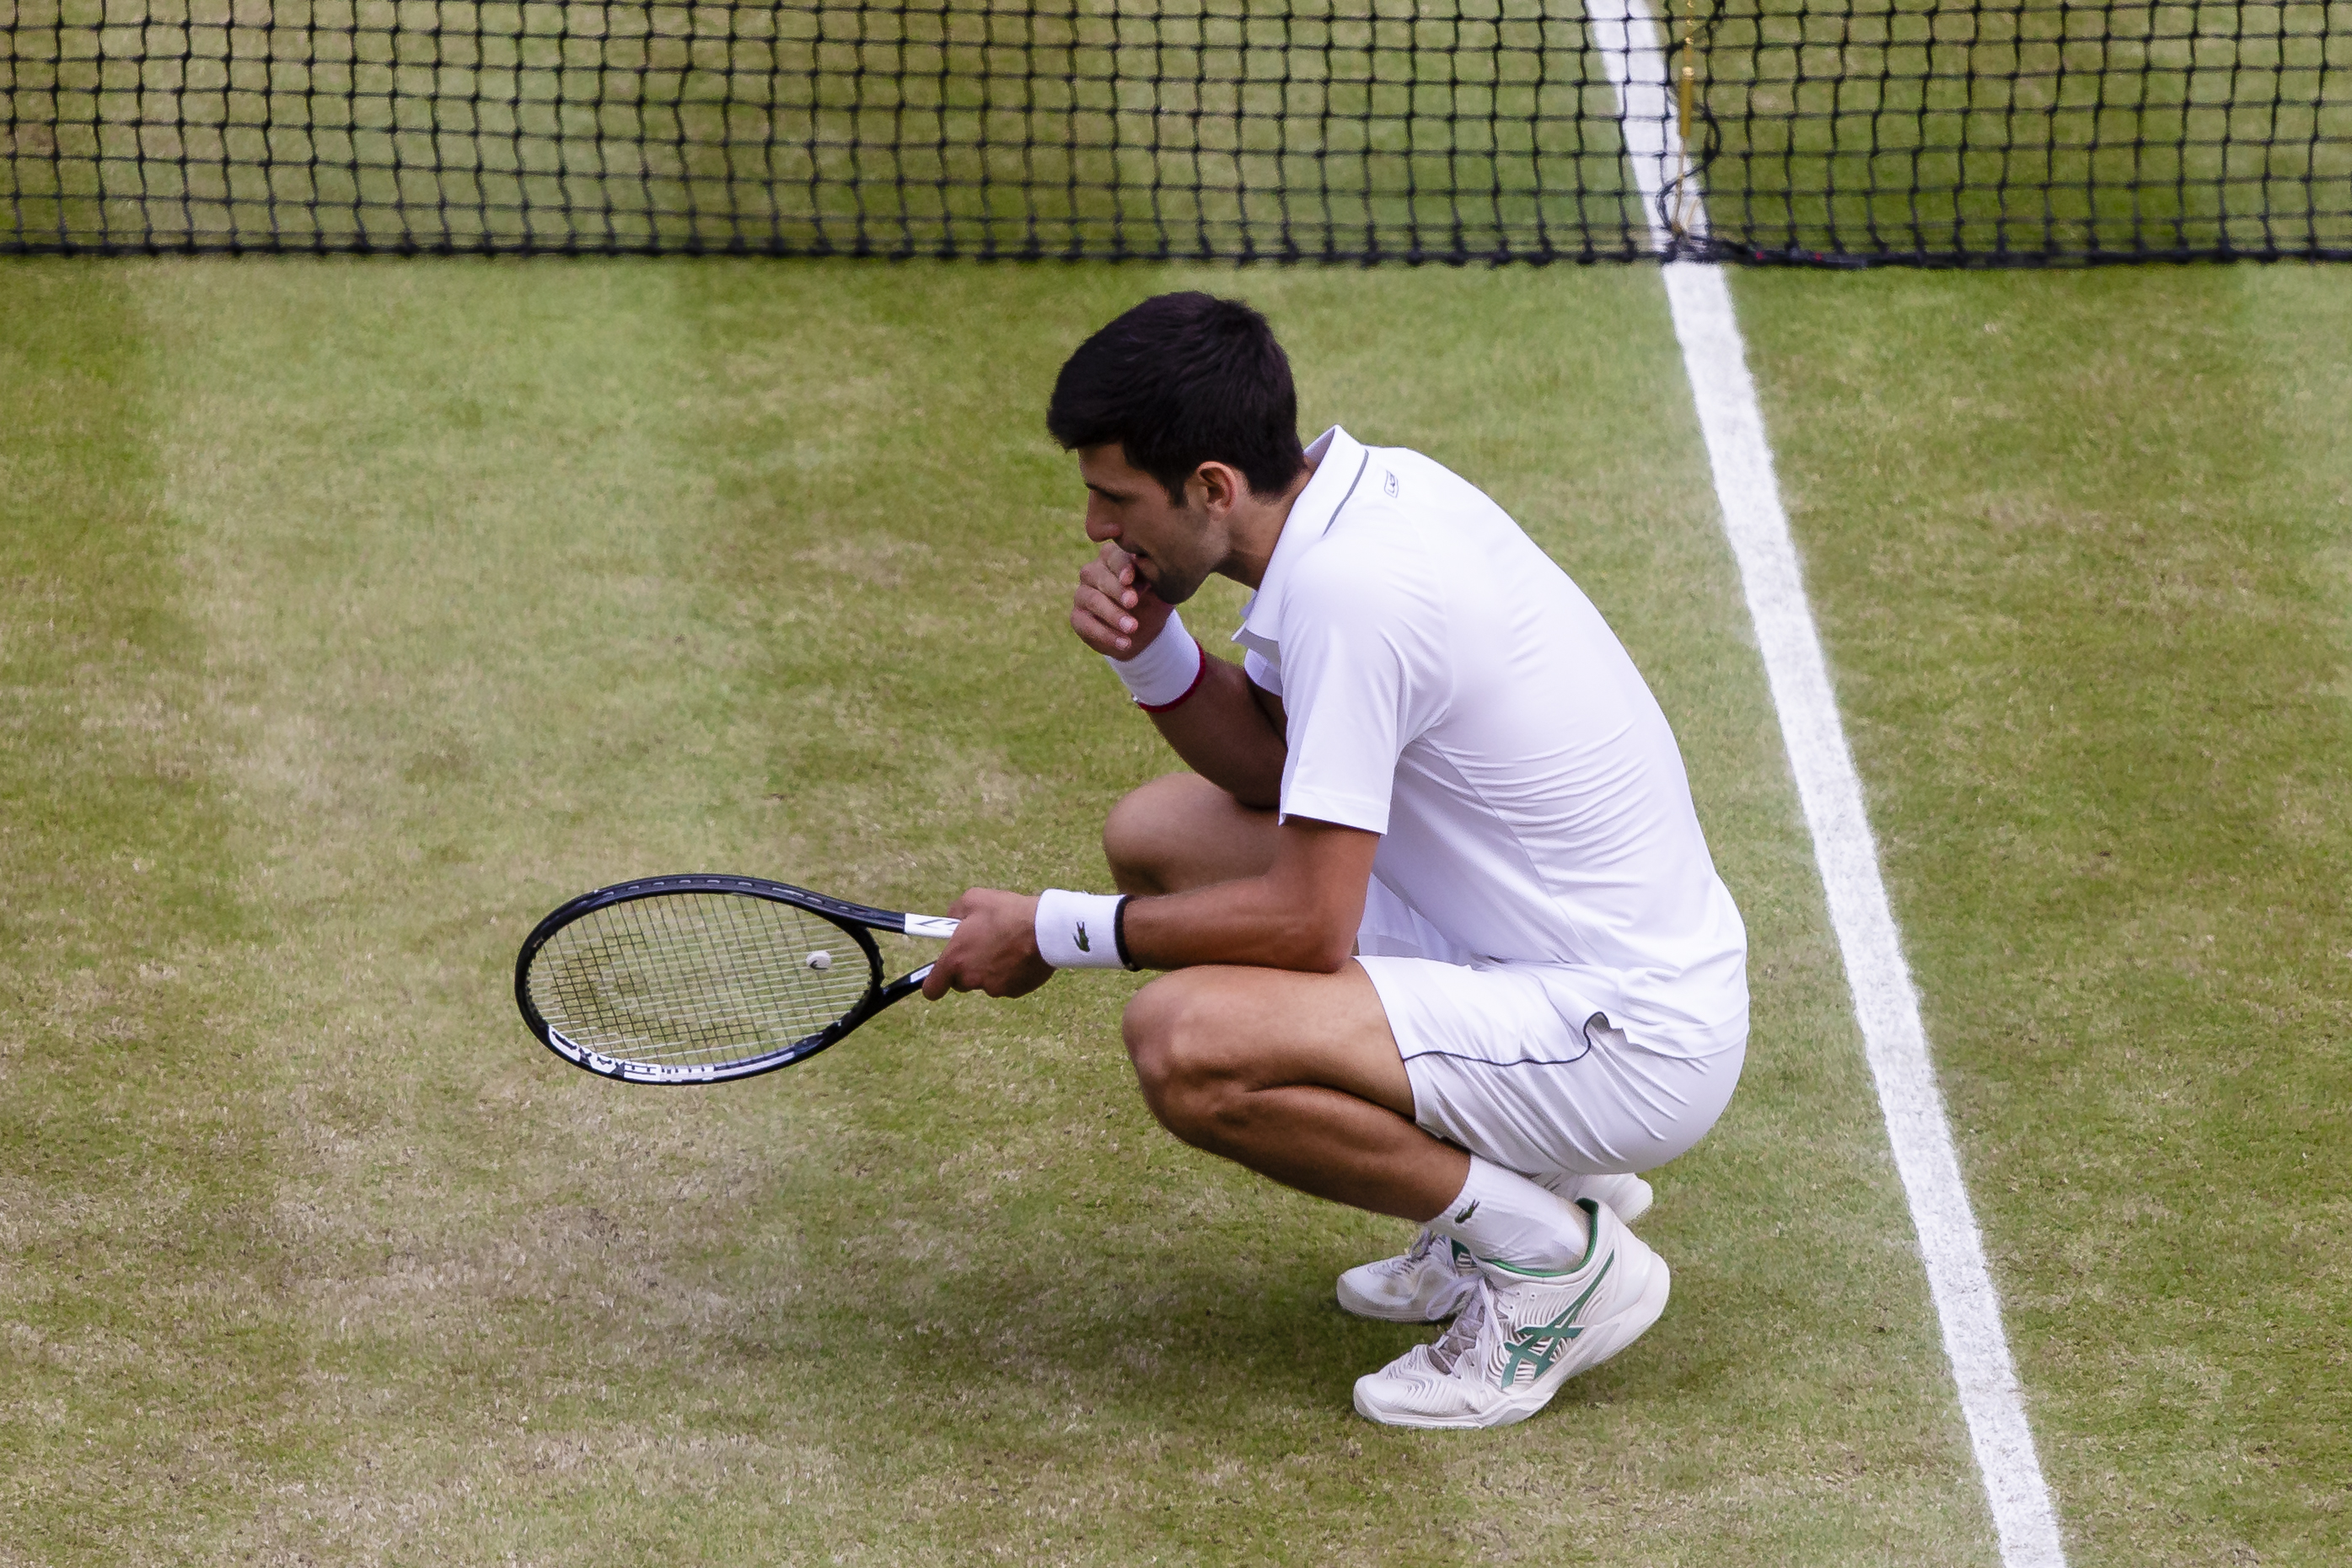 Grand Slam/ATP Tour, Wimbledon, Individual, Men, Final, Djokovic (Serbia) - Federer (Switzerland). Novak Djokovic squats on the grass after the match. Photo: Frank Molter/dpa (Photo by Frank Molter/picture alliance via Getty Images) (picture alliance&amp; via Getty Image)